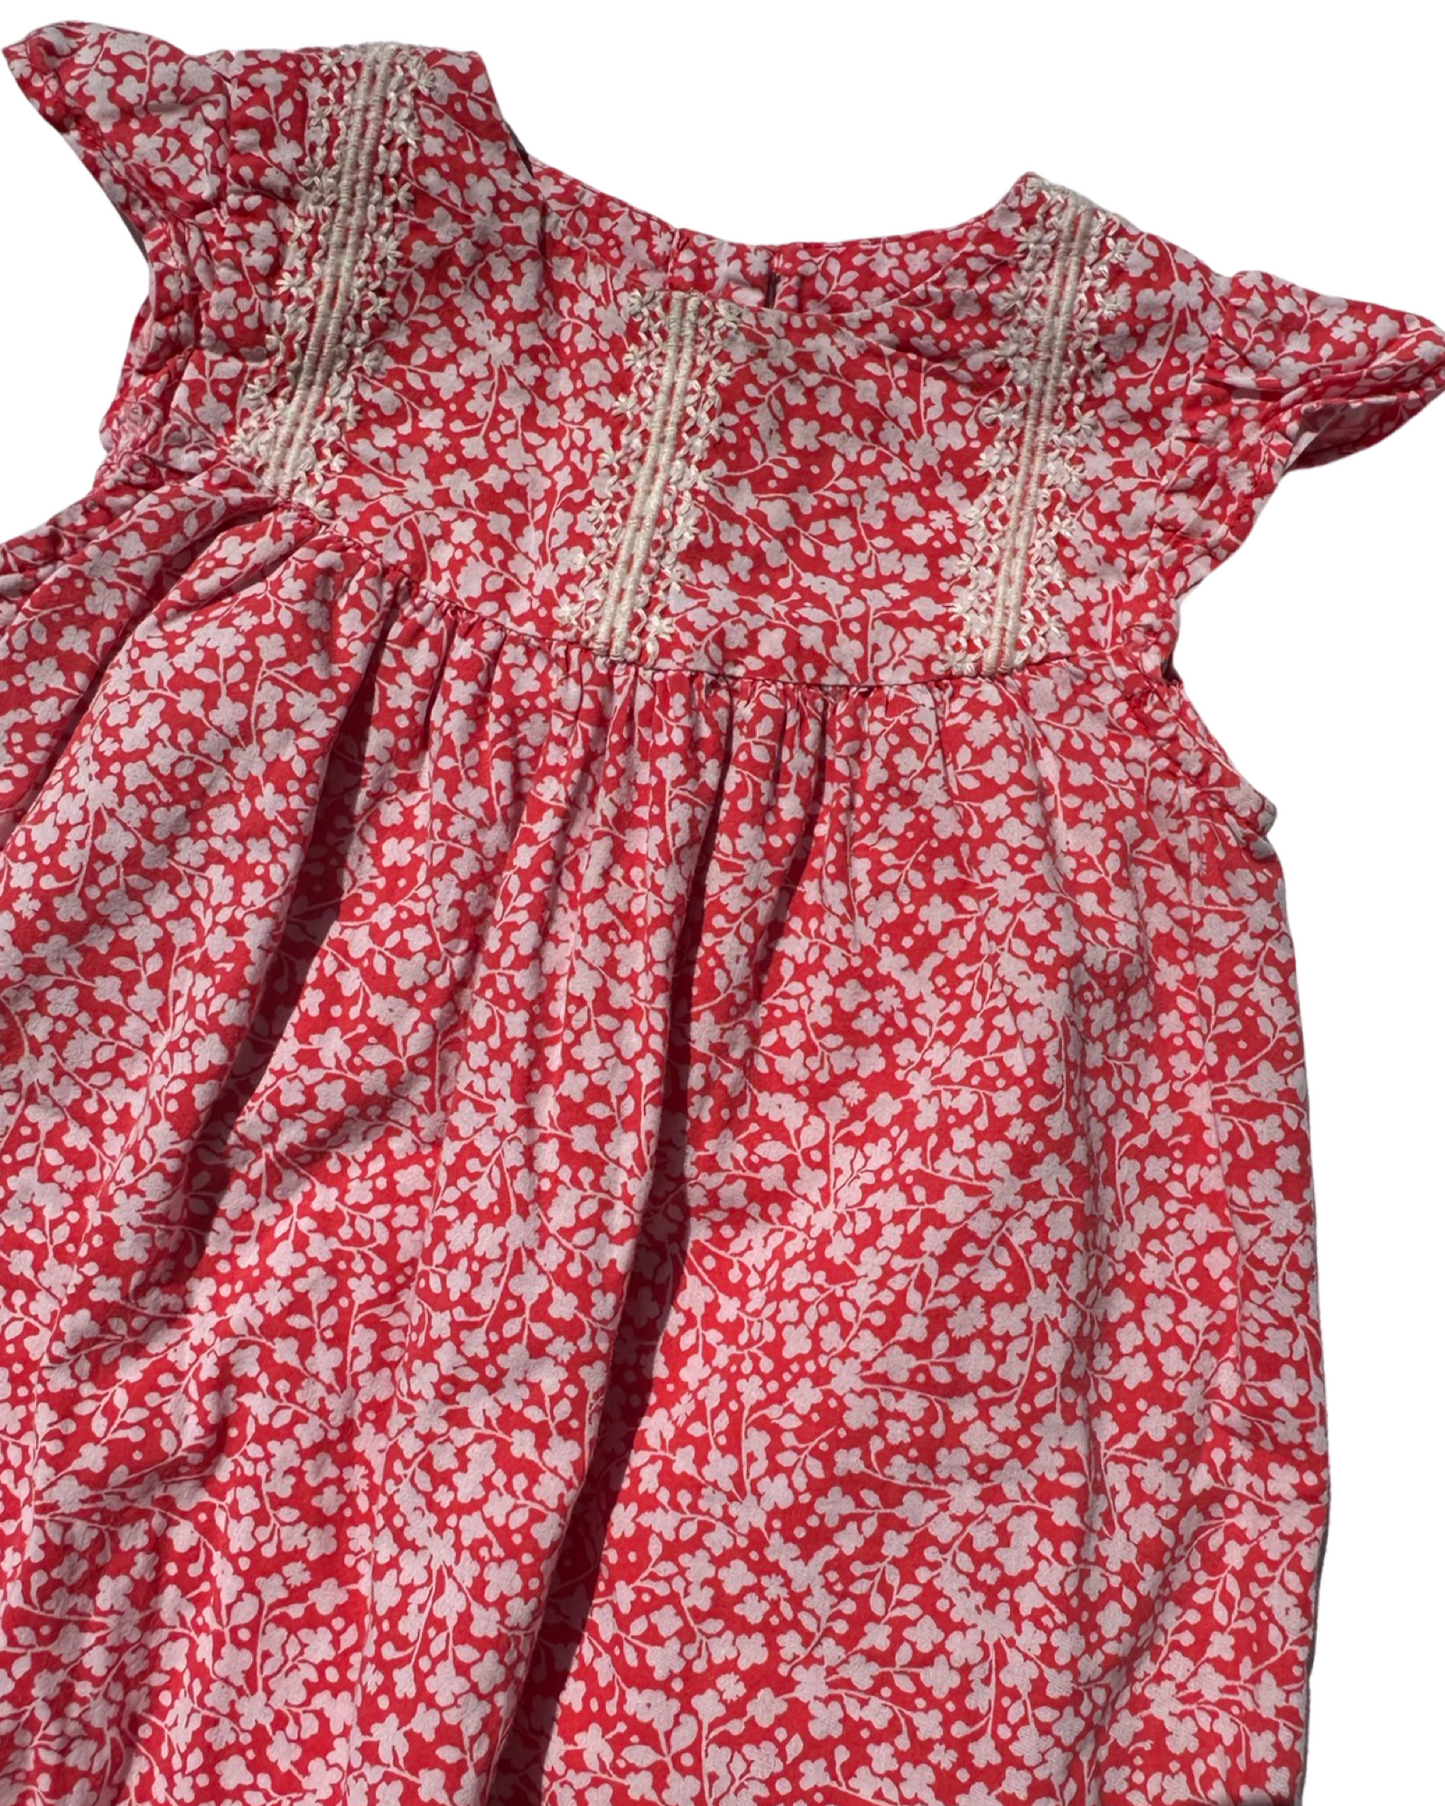 M&S red ditsy floral print romper (size 6-9mths)